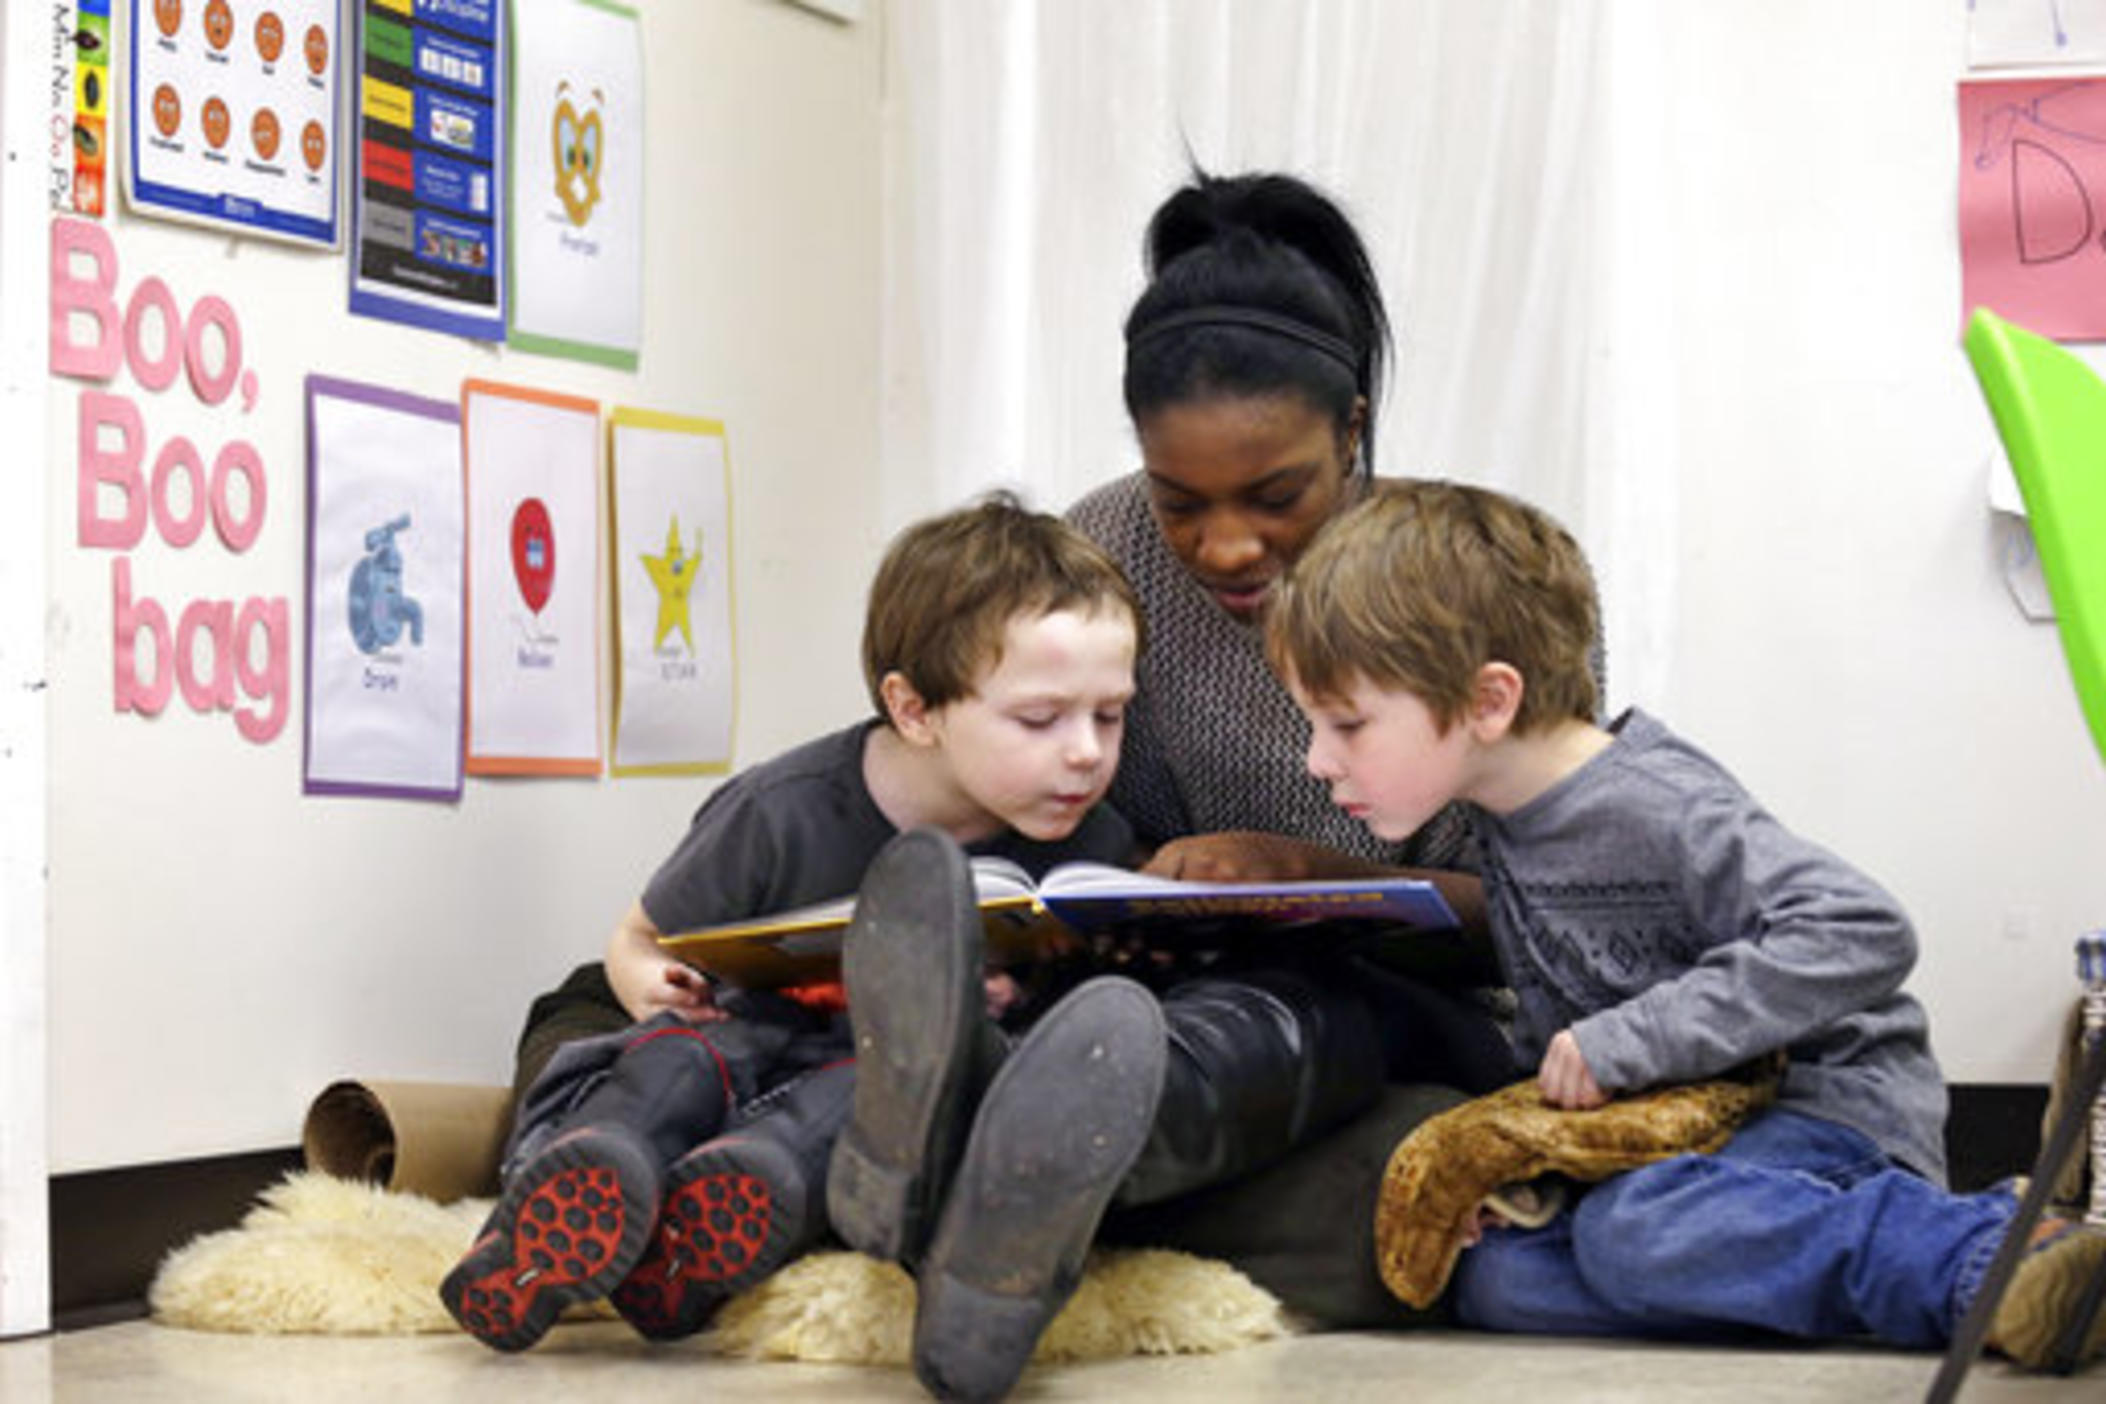 A woman reads to two children